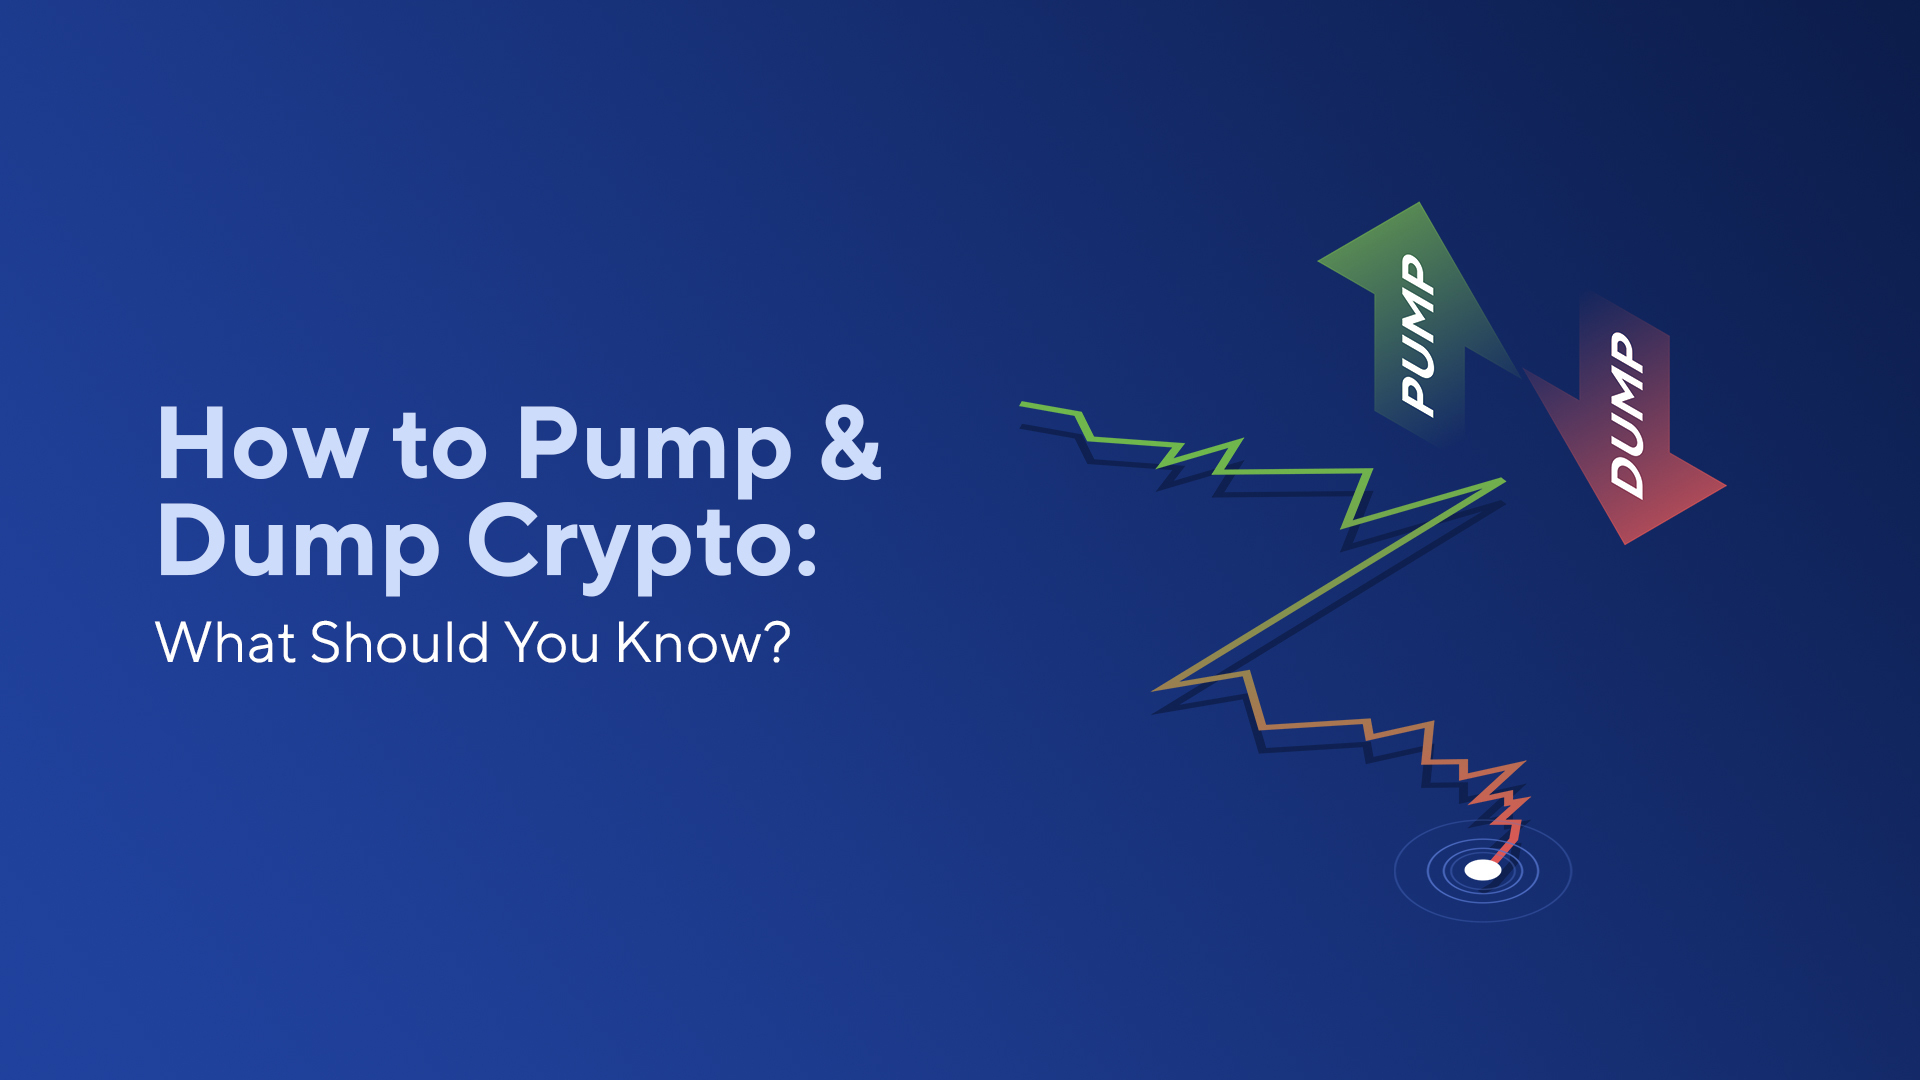 cryptocurrency pump and dump groups gmail.com